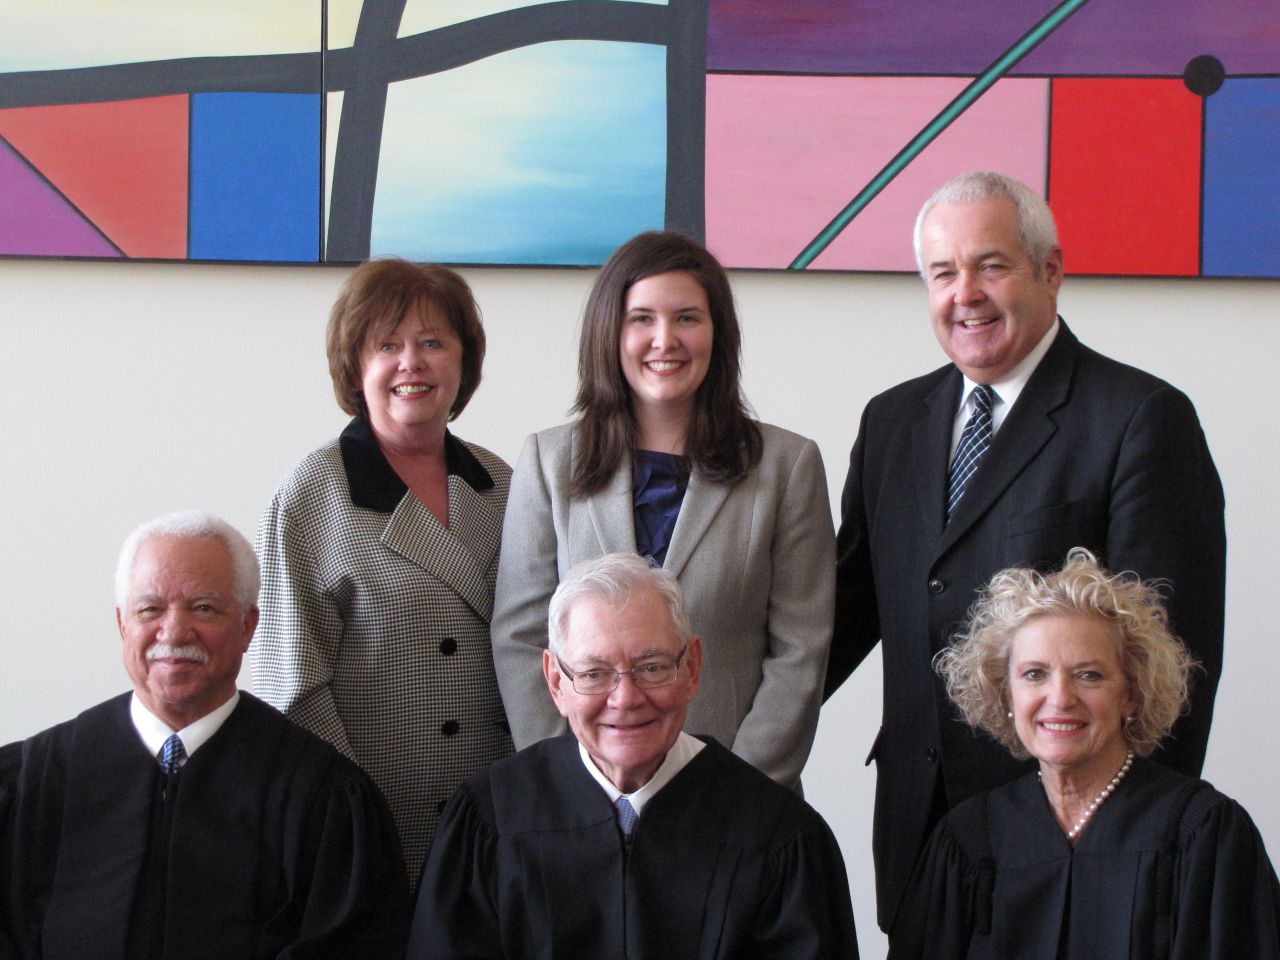 Front row: Justices Freeman, Fitzgerald and Burke. Back row: ISBA member Al Durkin (right) with his wife, Kathy, and daughter Jessica, who was admitted to the bar on Thursday.